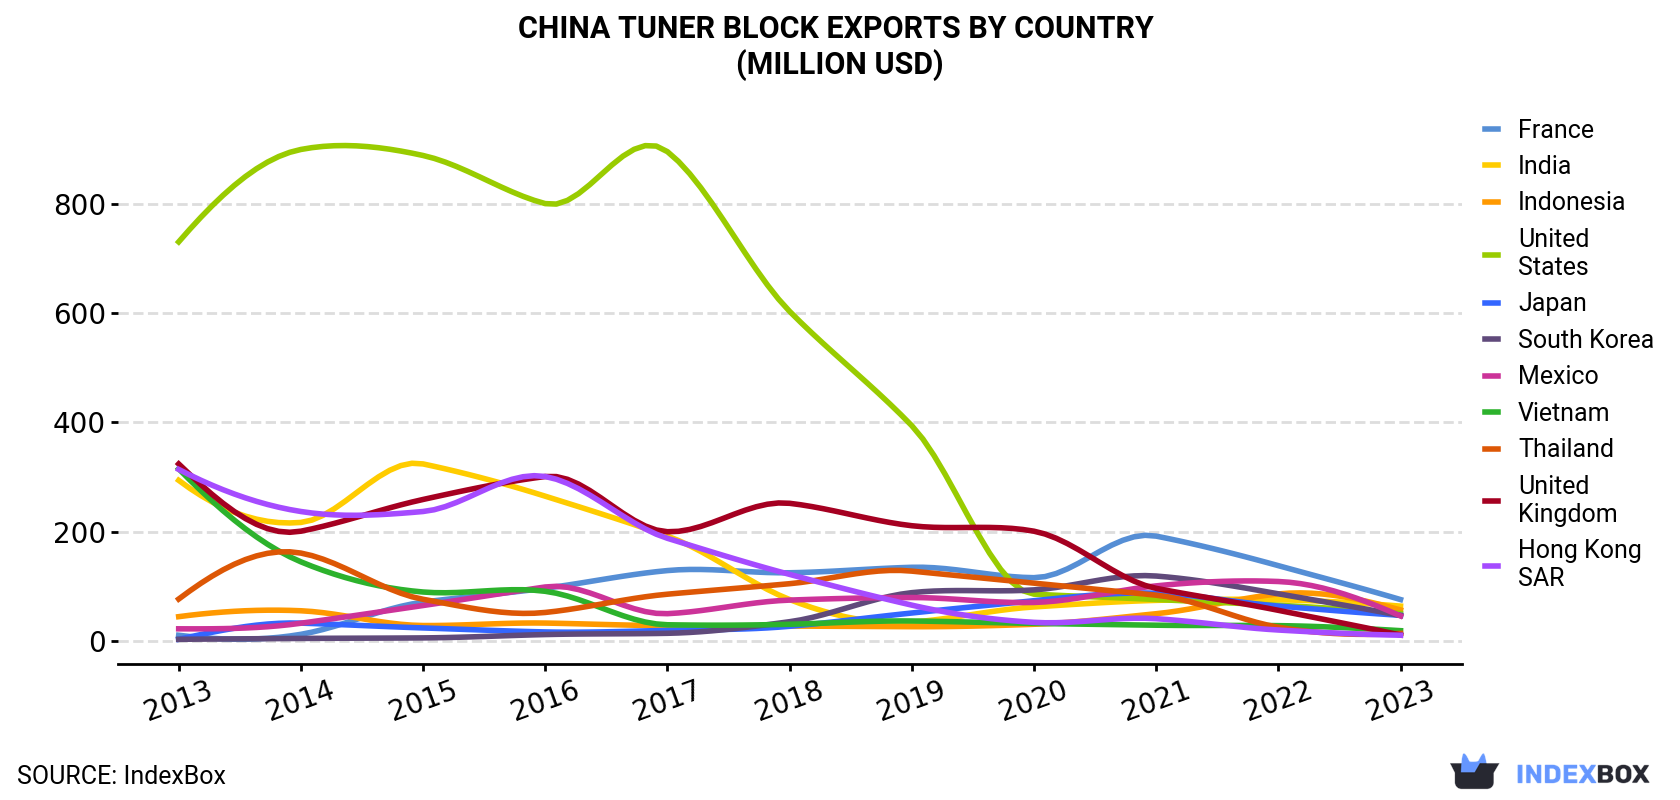 China Tuner Block Exports By Country (Million USD)